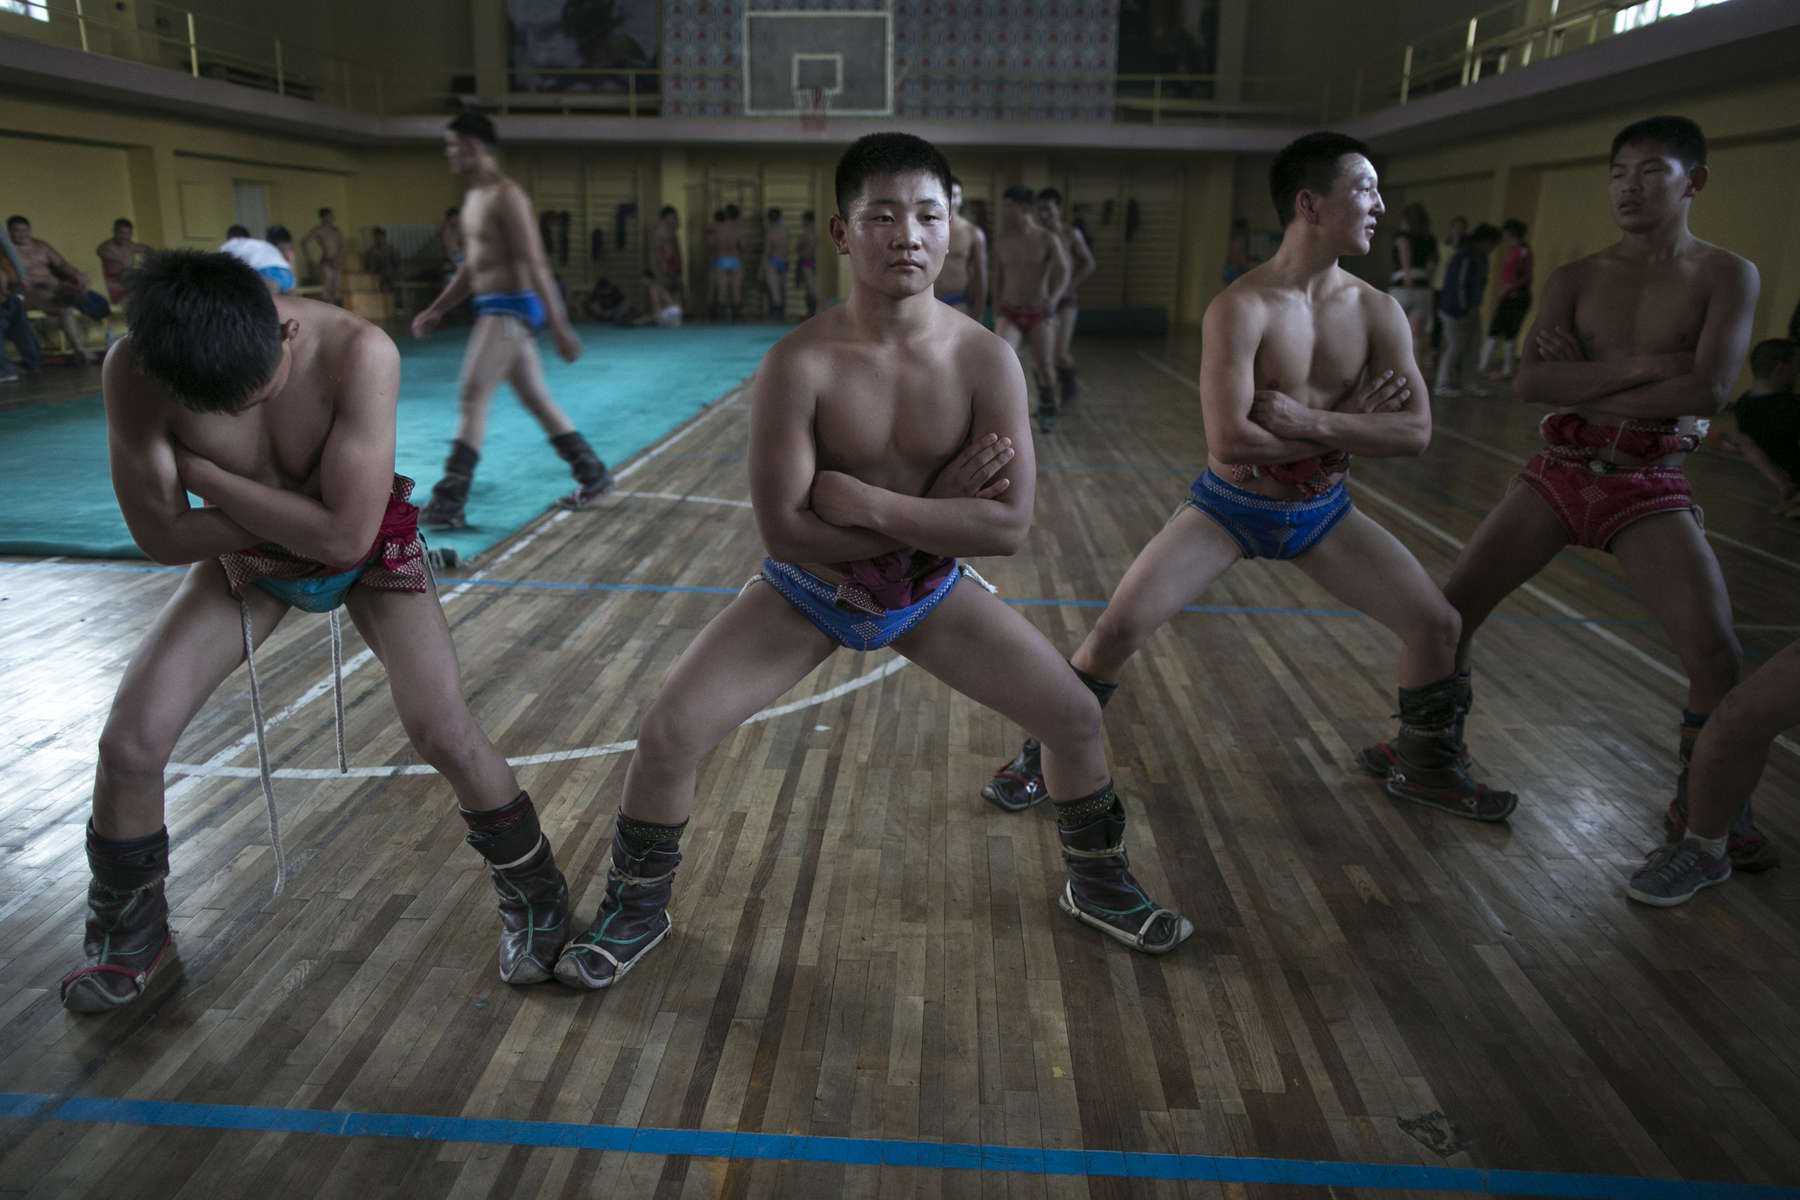 Mongolian wrestlers practice their squats trying to strengthen their thighs during practice at a local wrestling school. Mongolia is the most sparsely populated country on earth, but its people are some of the strongest. In Mongolia, wrestling is the most important sport that runs deep into its culture along with horsemanship and archery. Going back for hundreds of years, history books tell the story of how Genghis Khan considered wrestling to be an important way to keep his army combat ready while back in the Qing Dynasty (1646–1911) regular wrestling events were held. In Mongolia’s capitol city, Ulan Batar is home to many wrestling schools where almost daily you can see dozens of young men sweating in crowded gyms while in schools both girls and boys are taught some wrestling techniques.While my photo story gives a real behind the scenes look, it is unusual for a woman to document this macho scene of sweat and endurance.